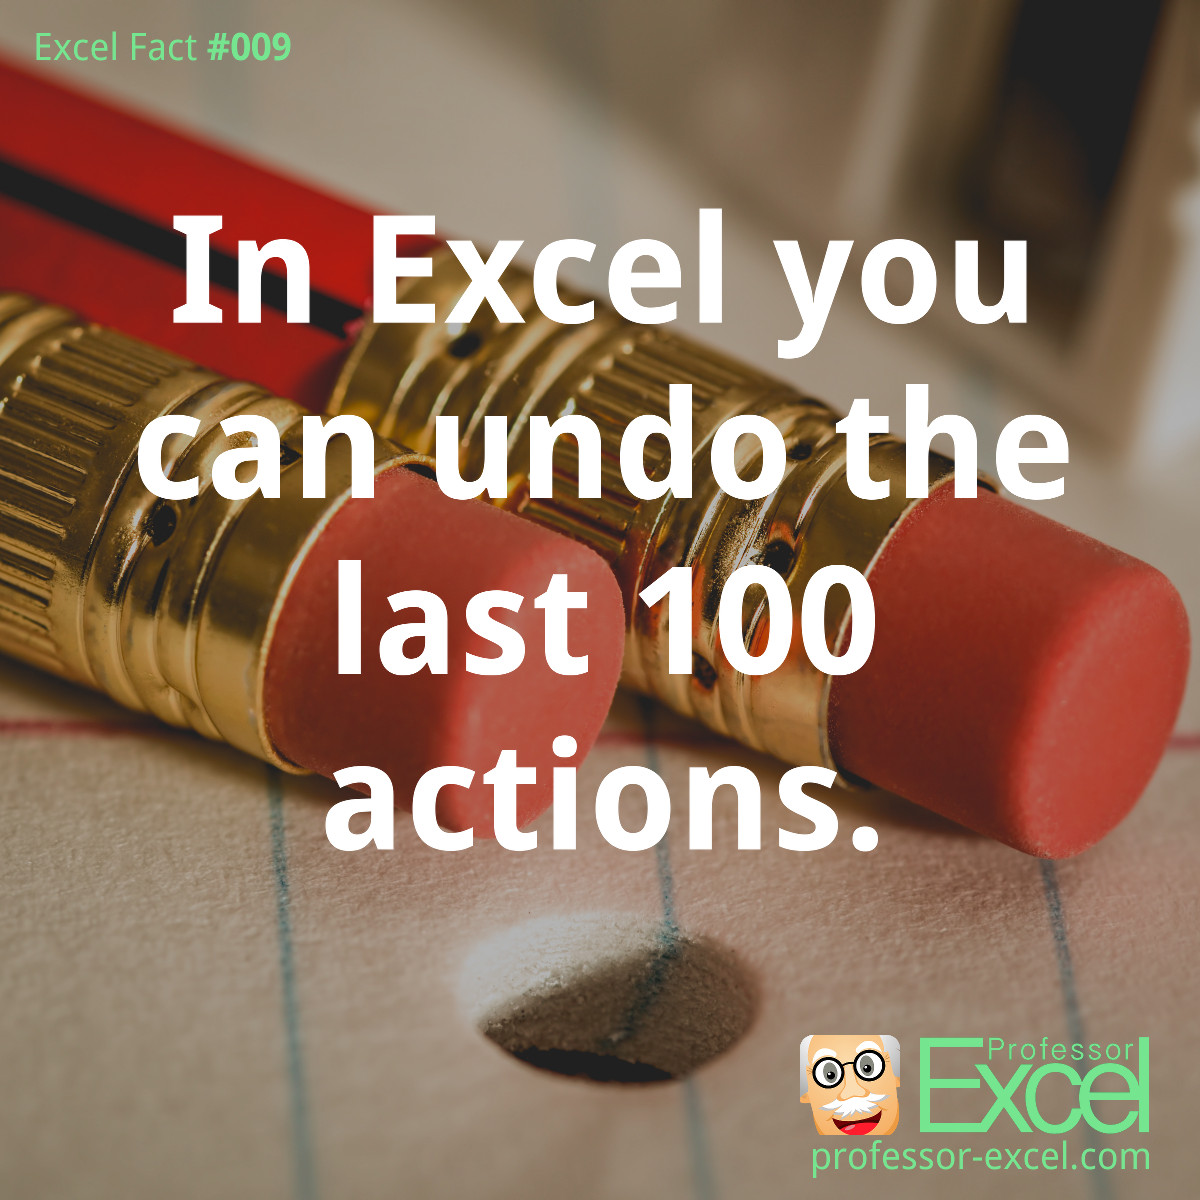 excel, excel fact, fact, undo, actions, number